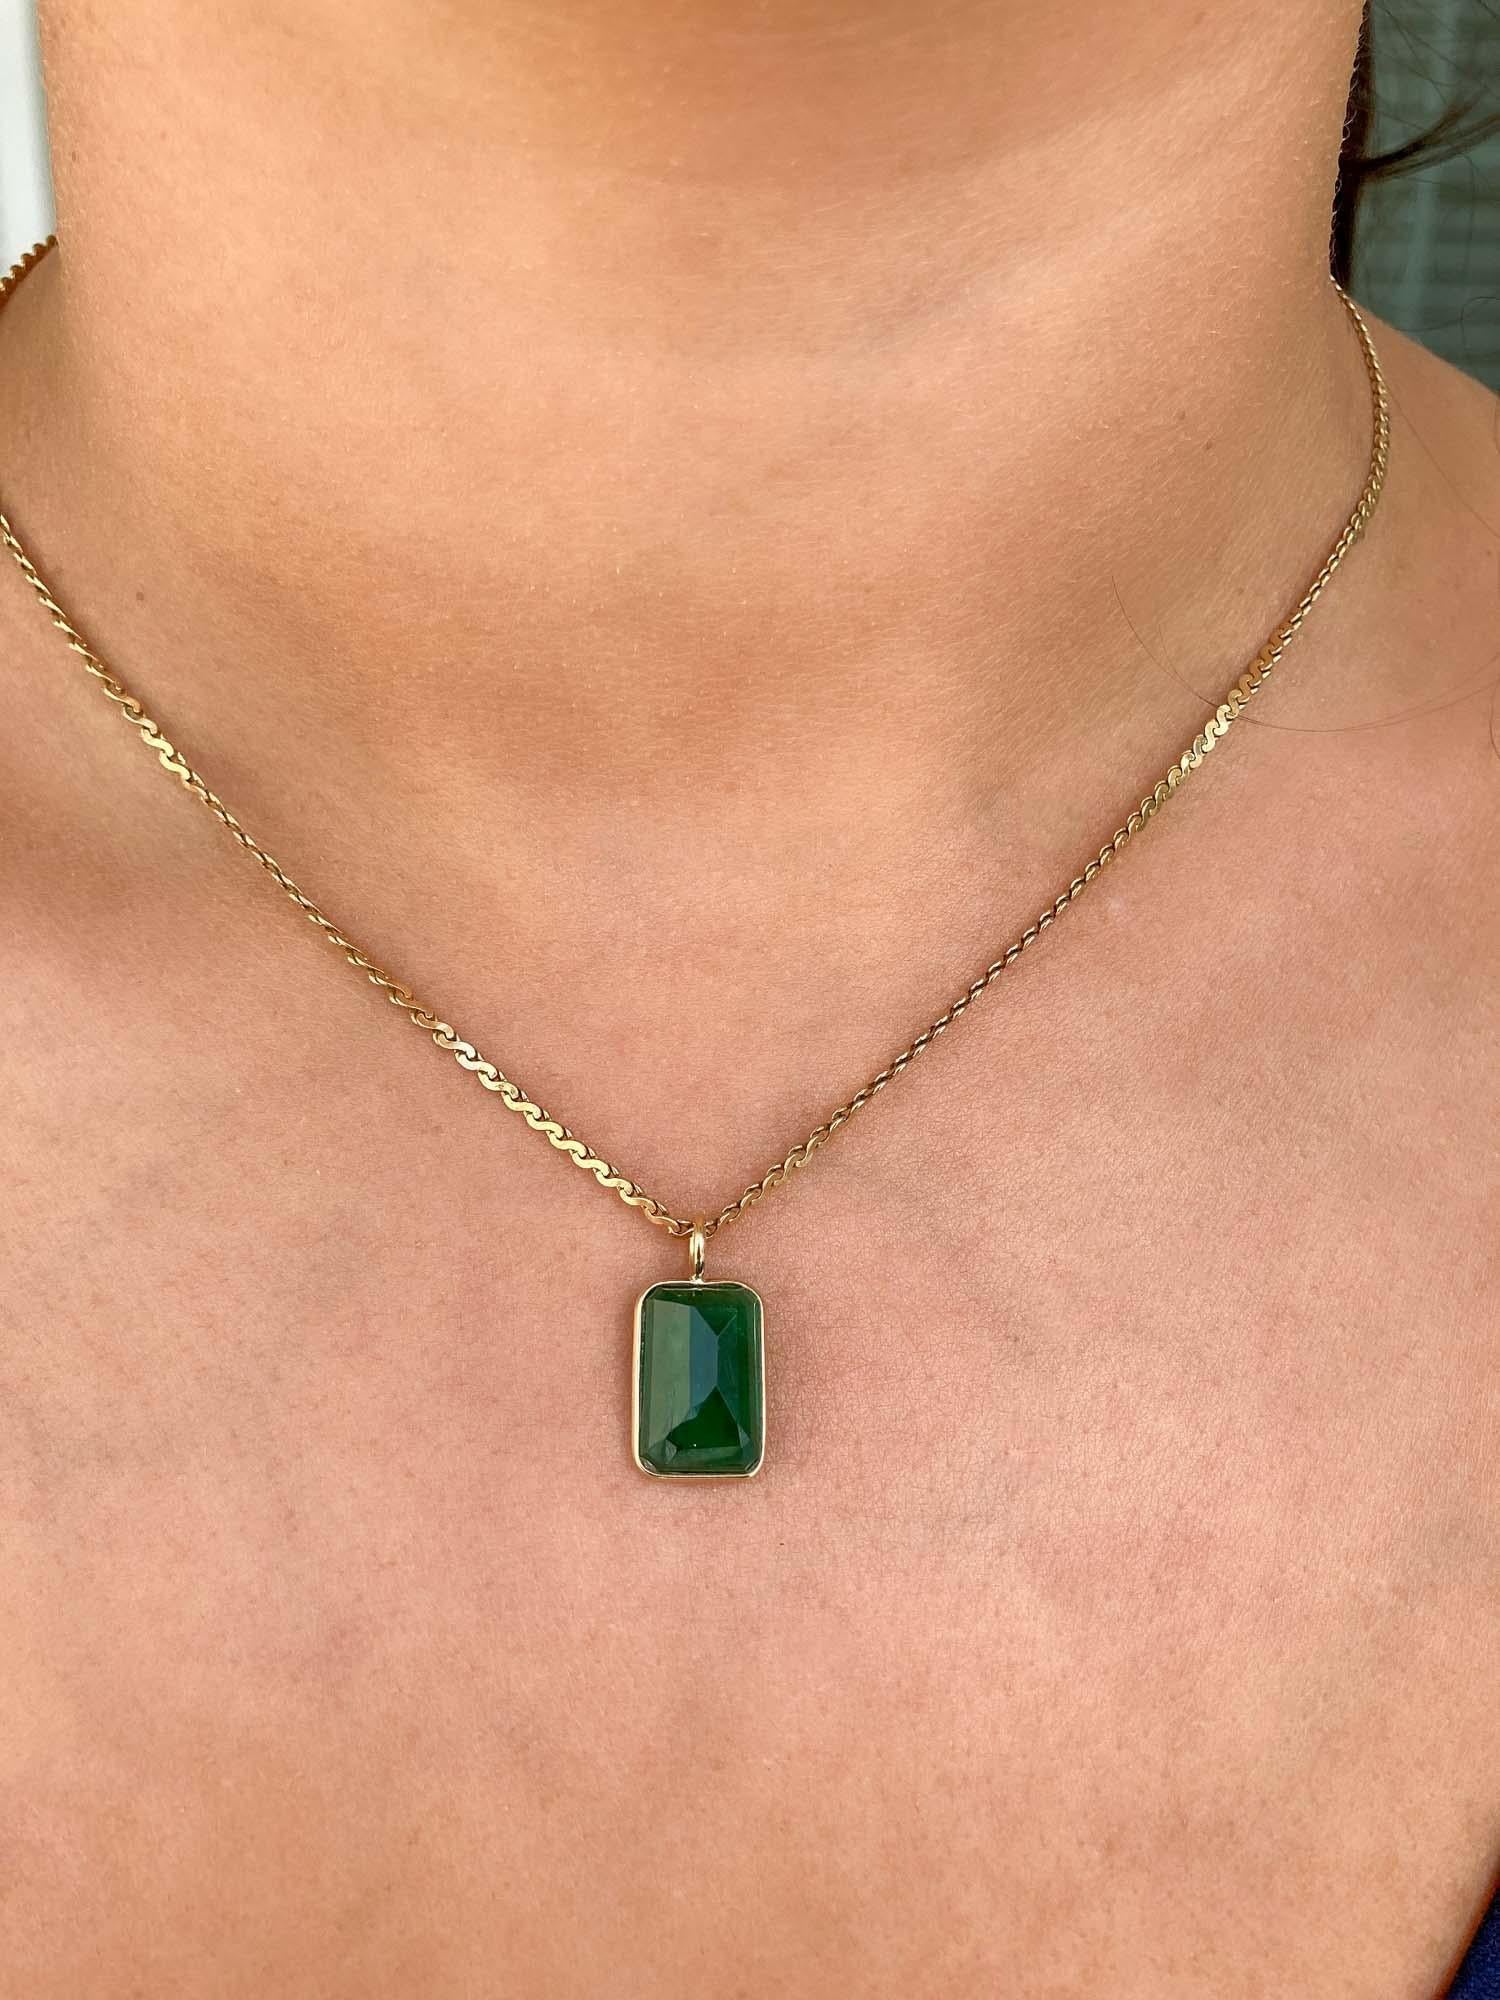 5.6ct Rectangle Emerald 14K Gold Bezel Set Necklace Pendant Charm OOAK AD2164-1 In New Condition In Osprey, FL